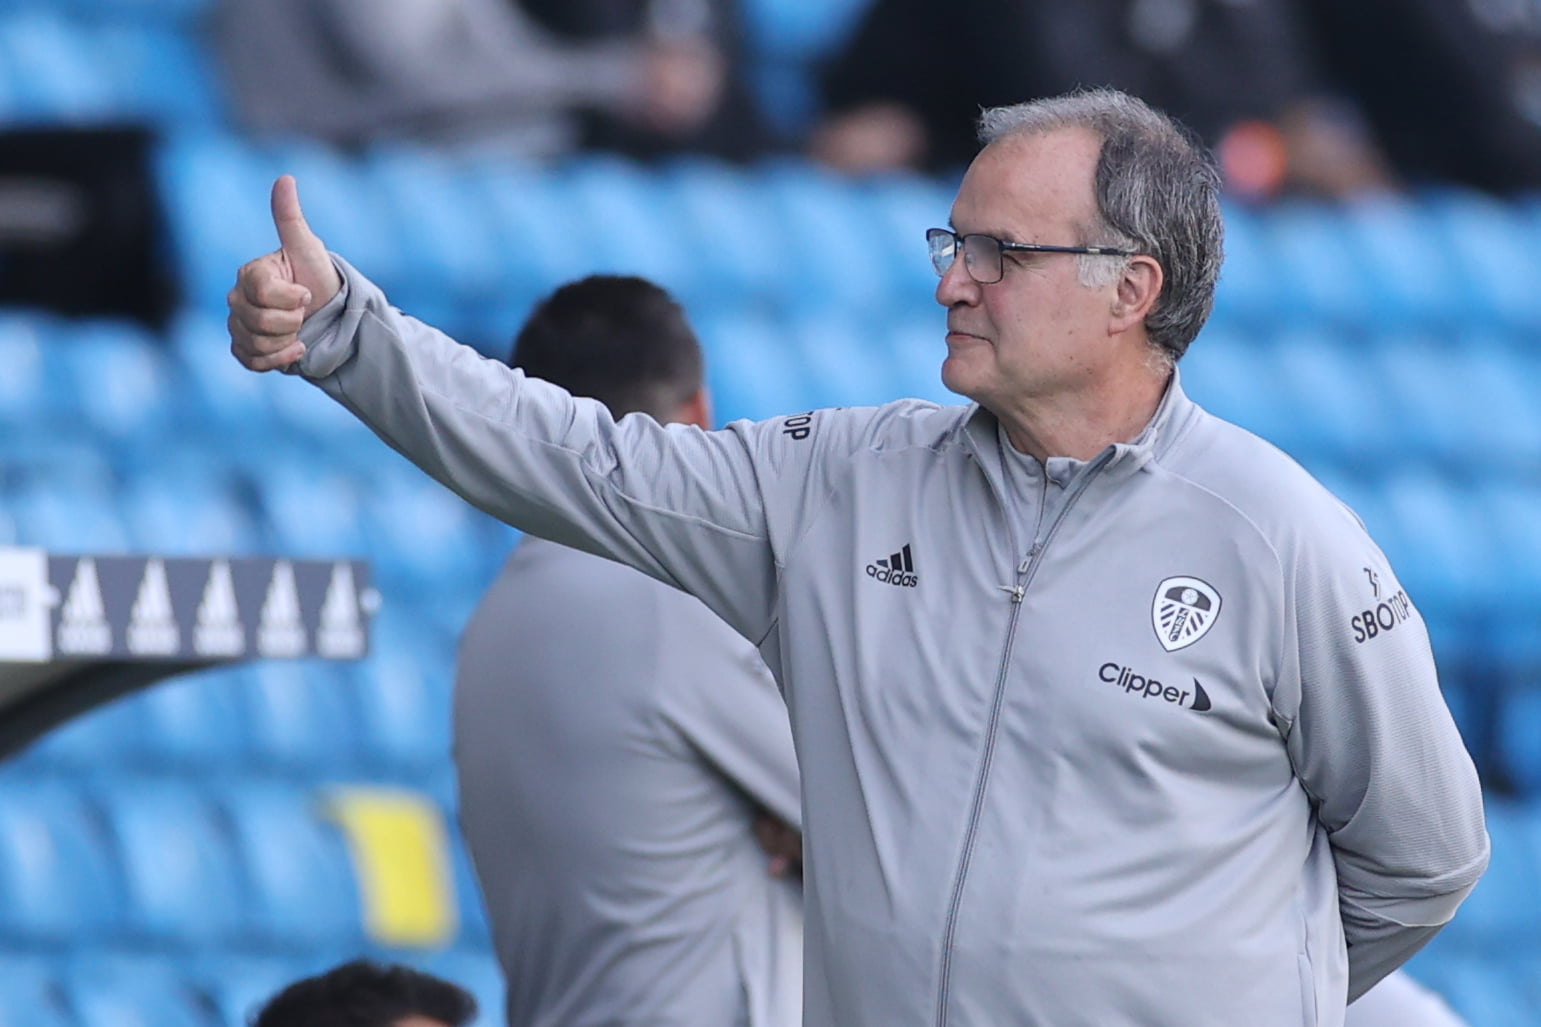 Up to Five First-Team Players Could Leave Leeds United - Bielsa gestures